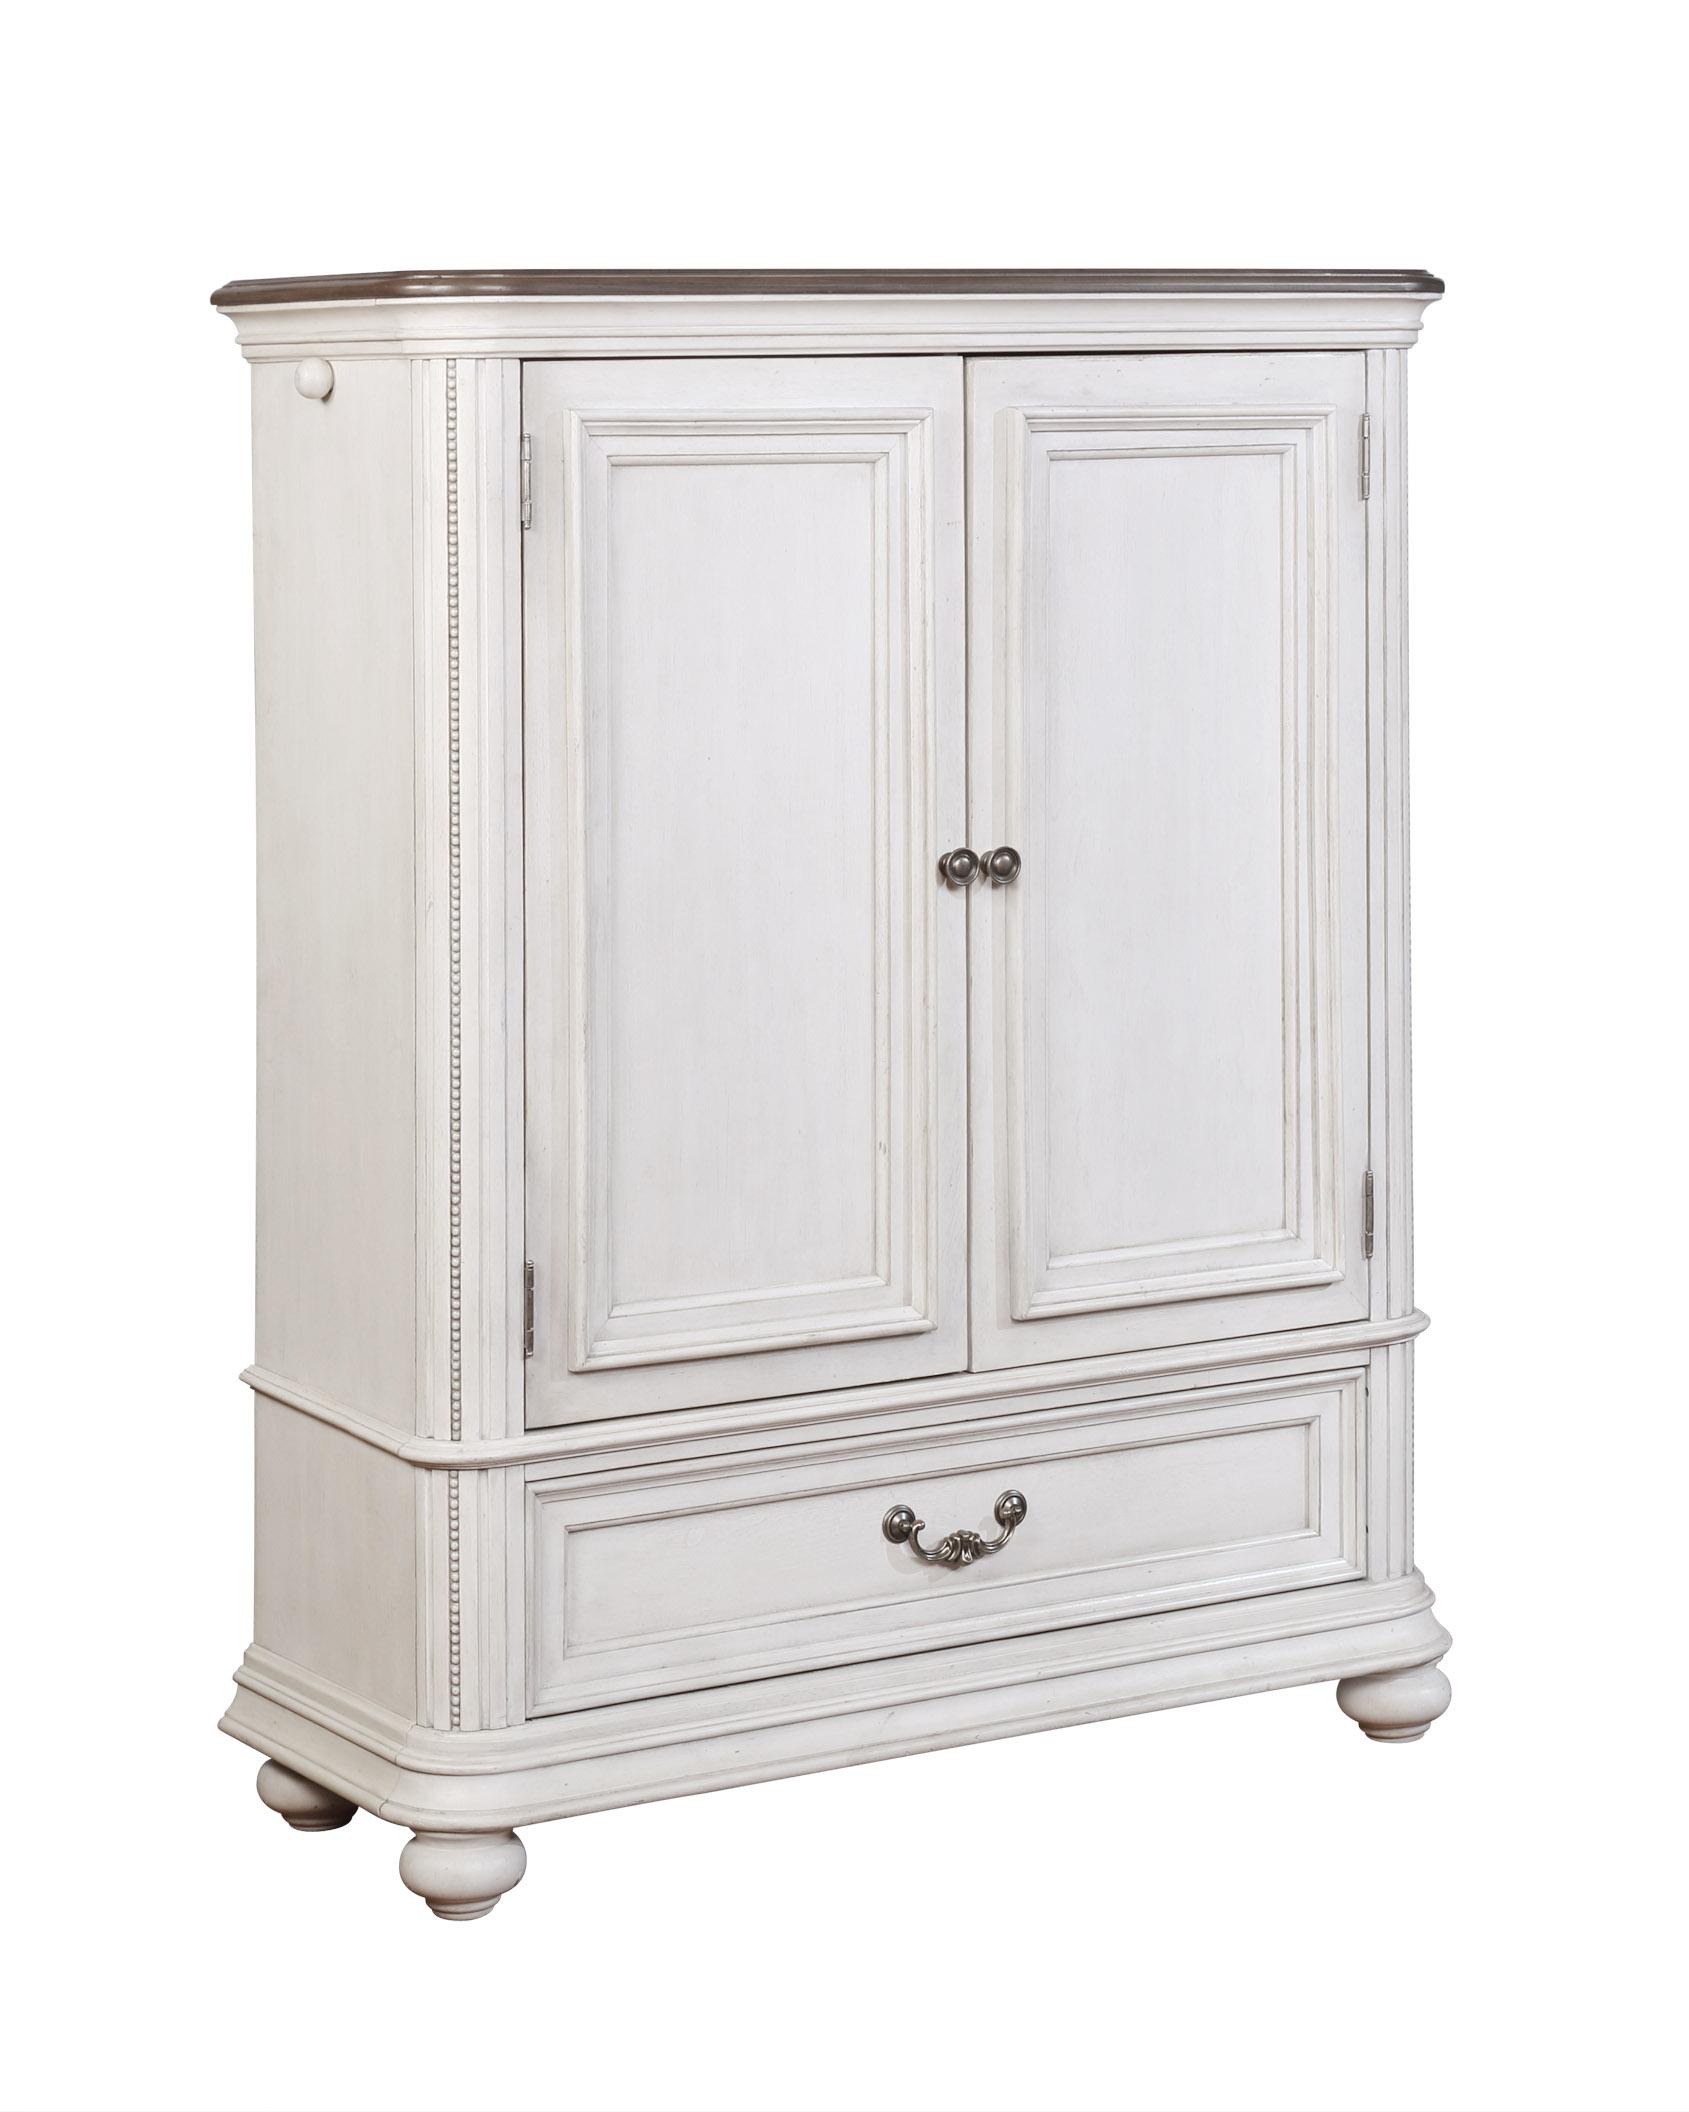 Lanett armoire with drawers and doors